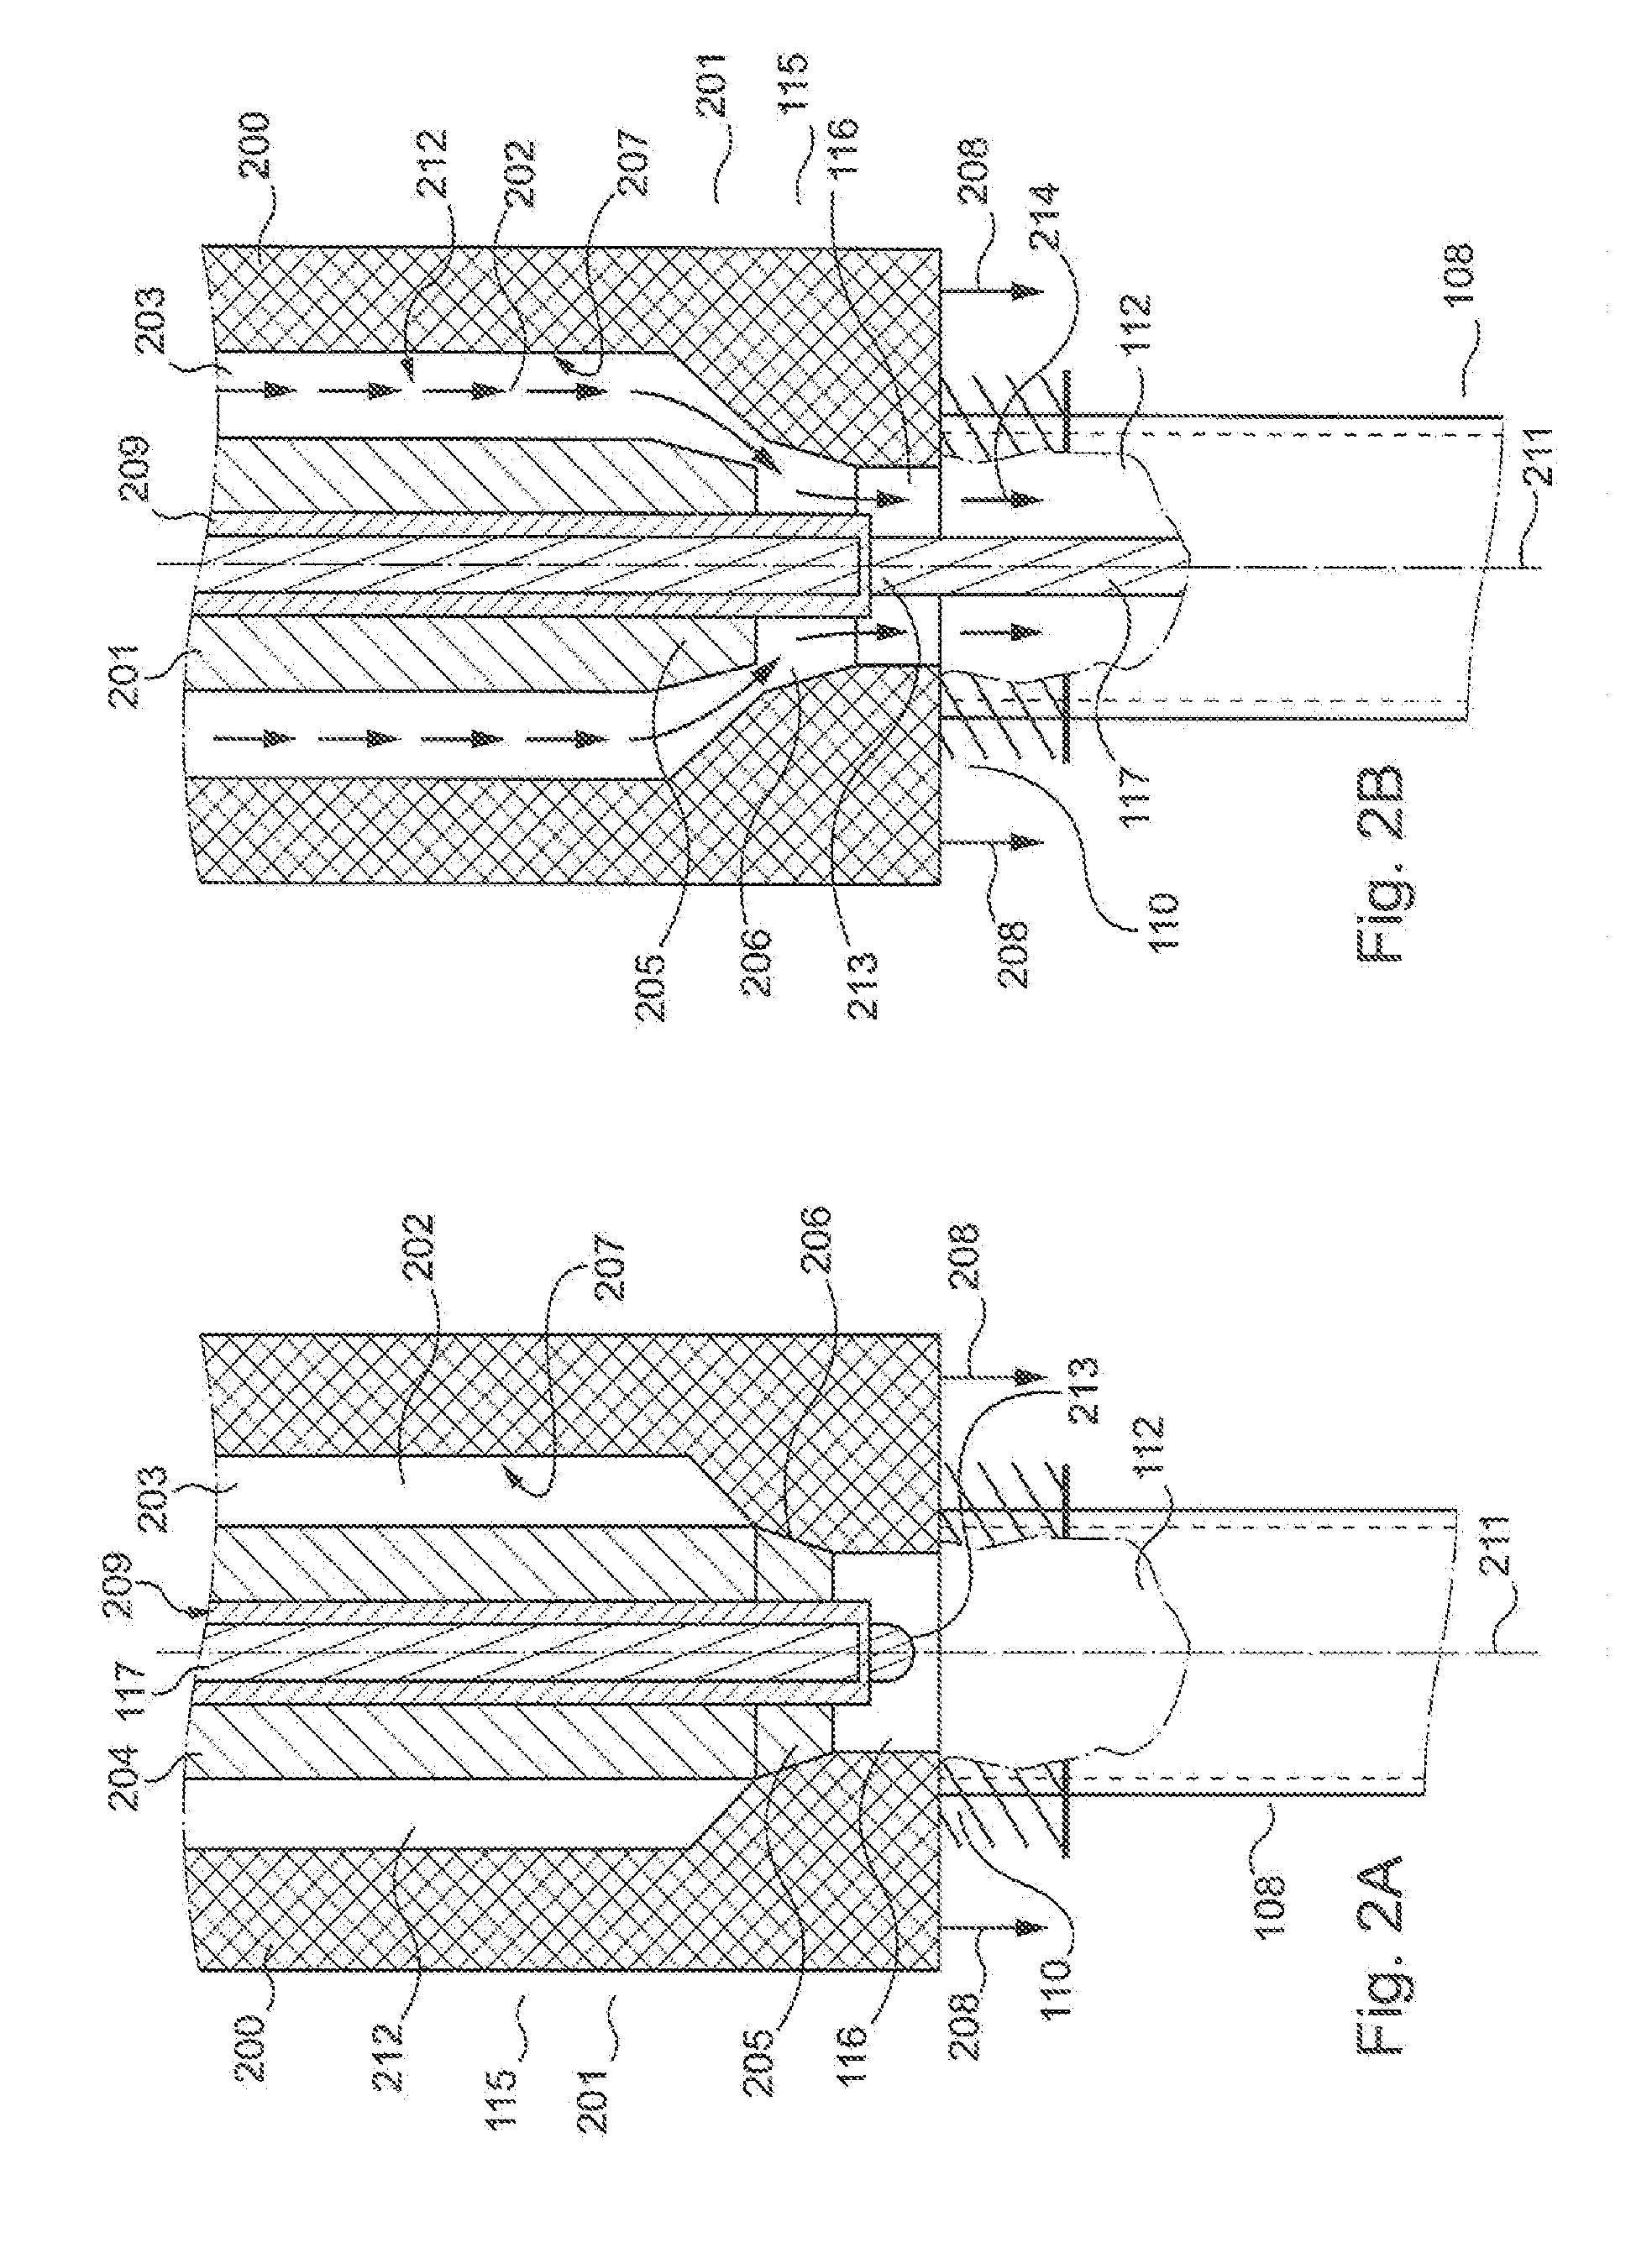 Apparatus and method for fabricating and filling containers